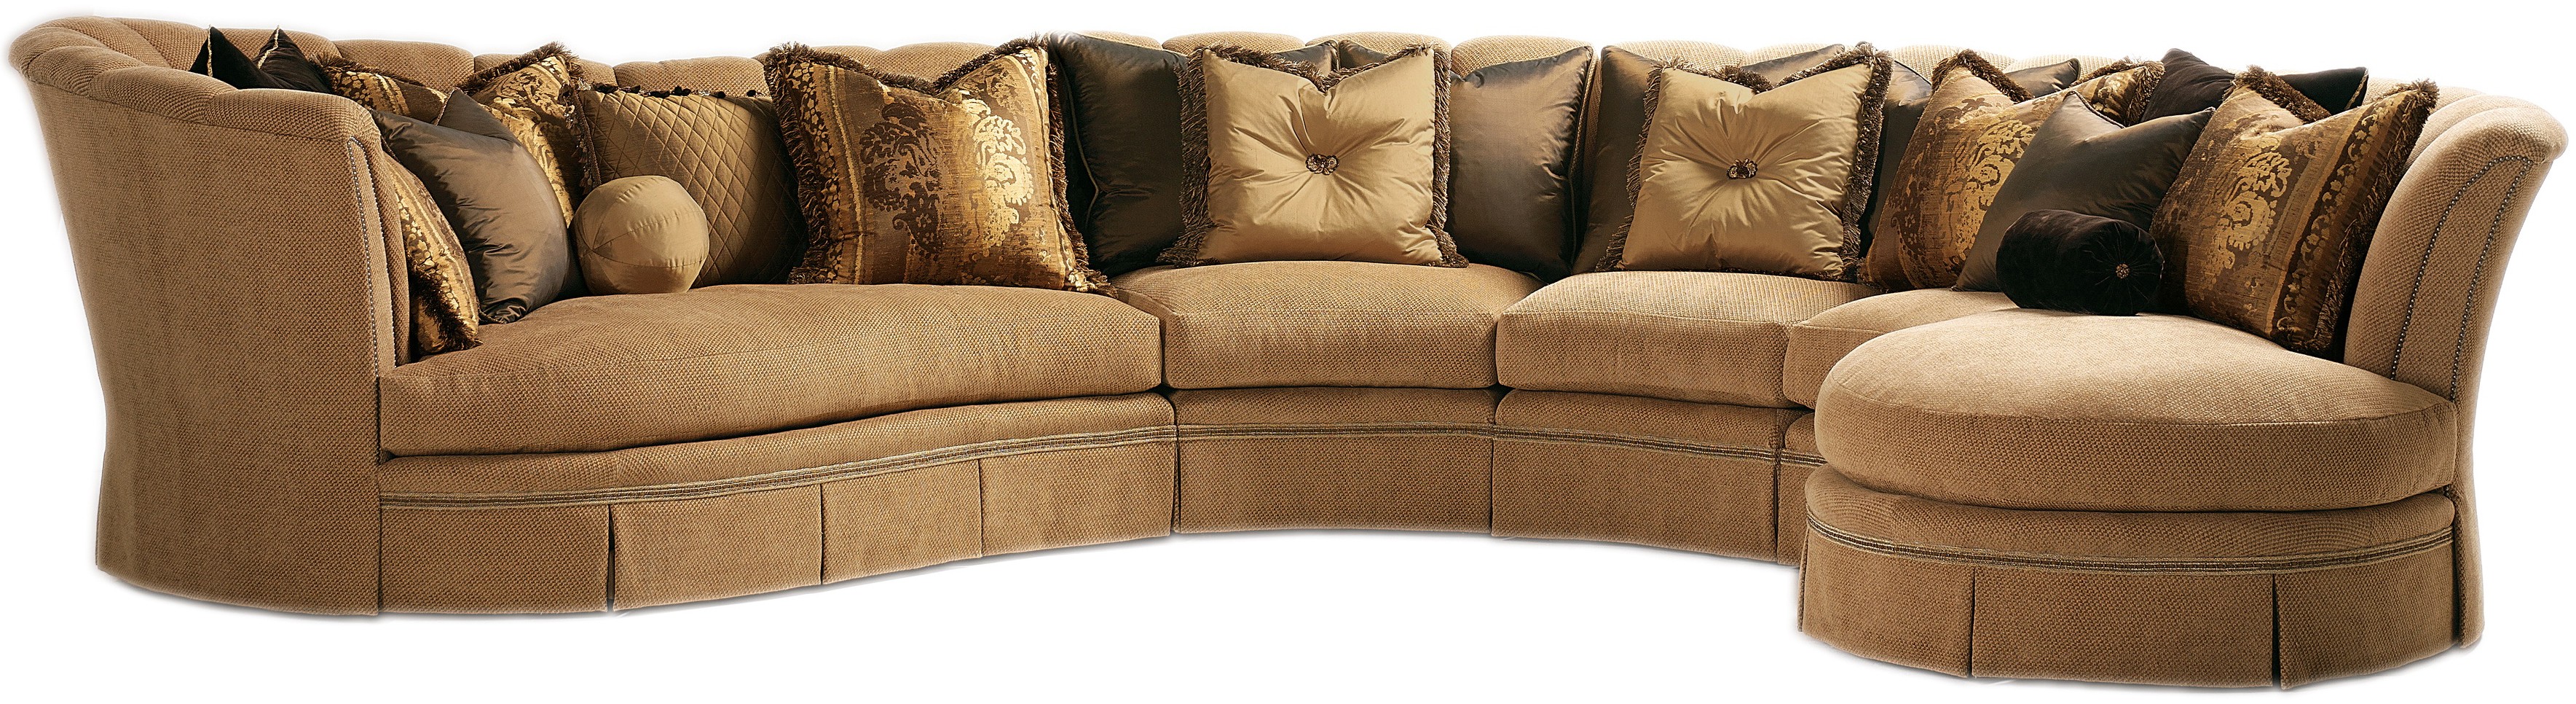 SECTIONALS - Leather & High End Upholstered Furniture Sectional with curved lines and coordinating accent pillows